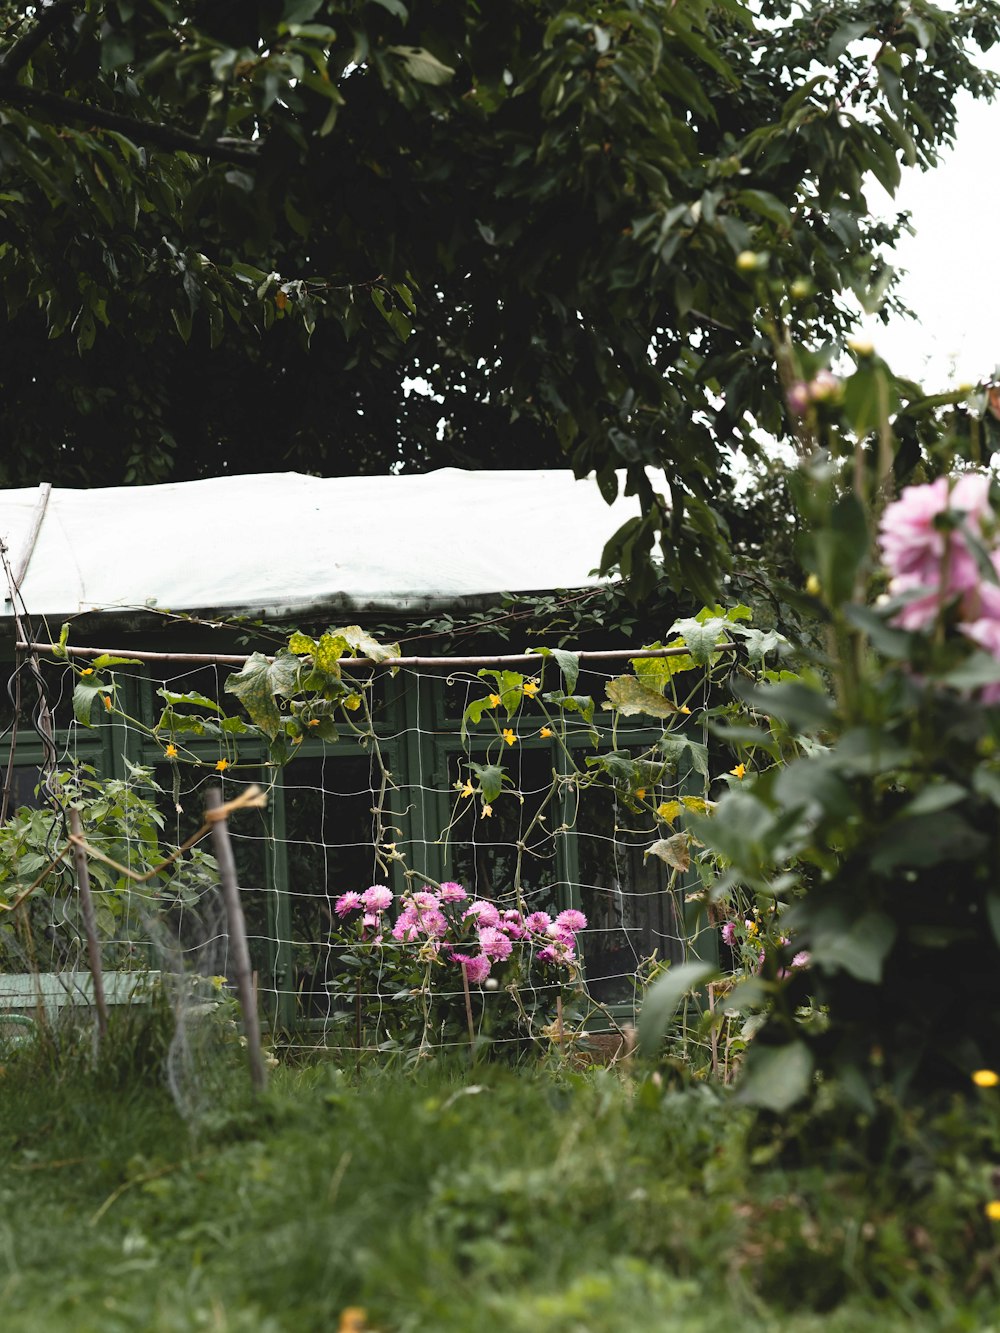 a fenced in area with flowers and a building in the background